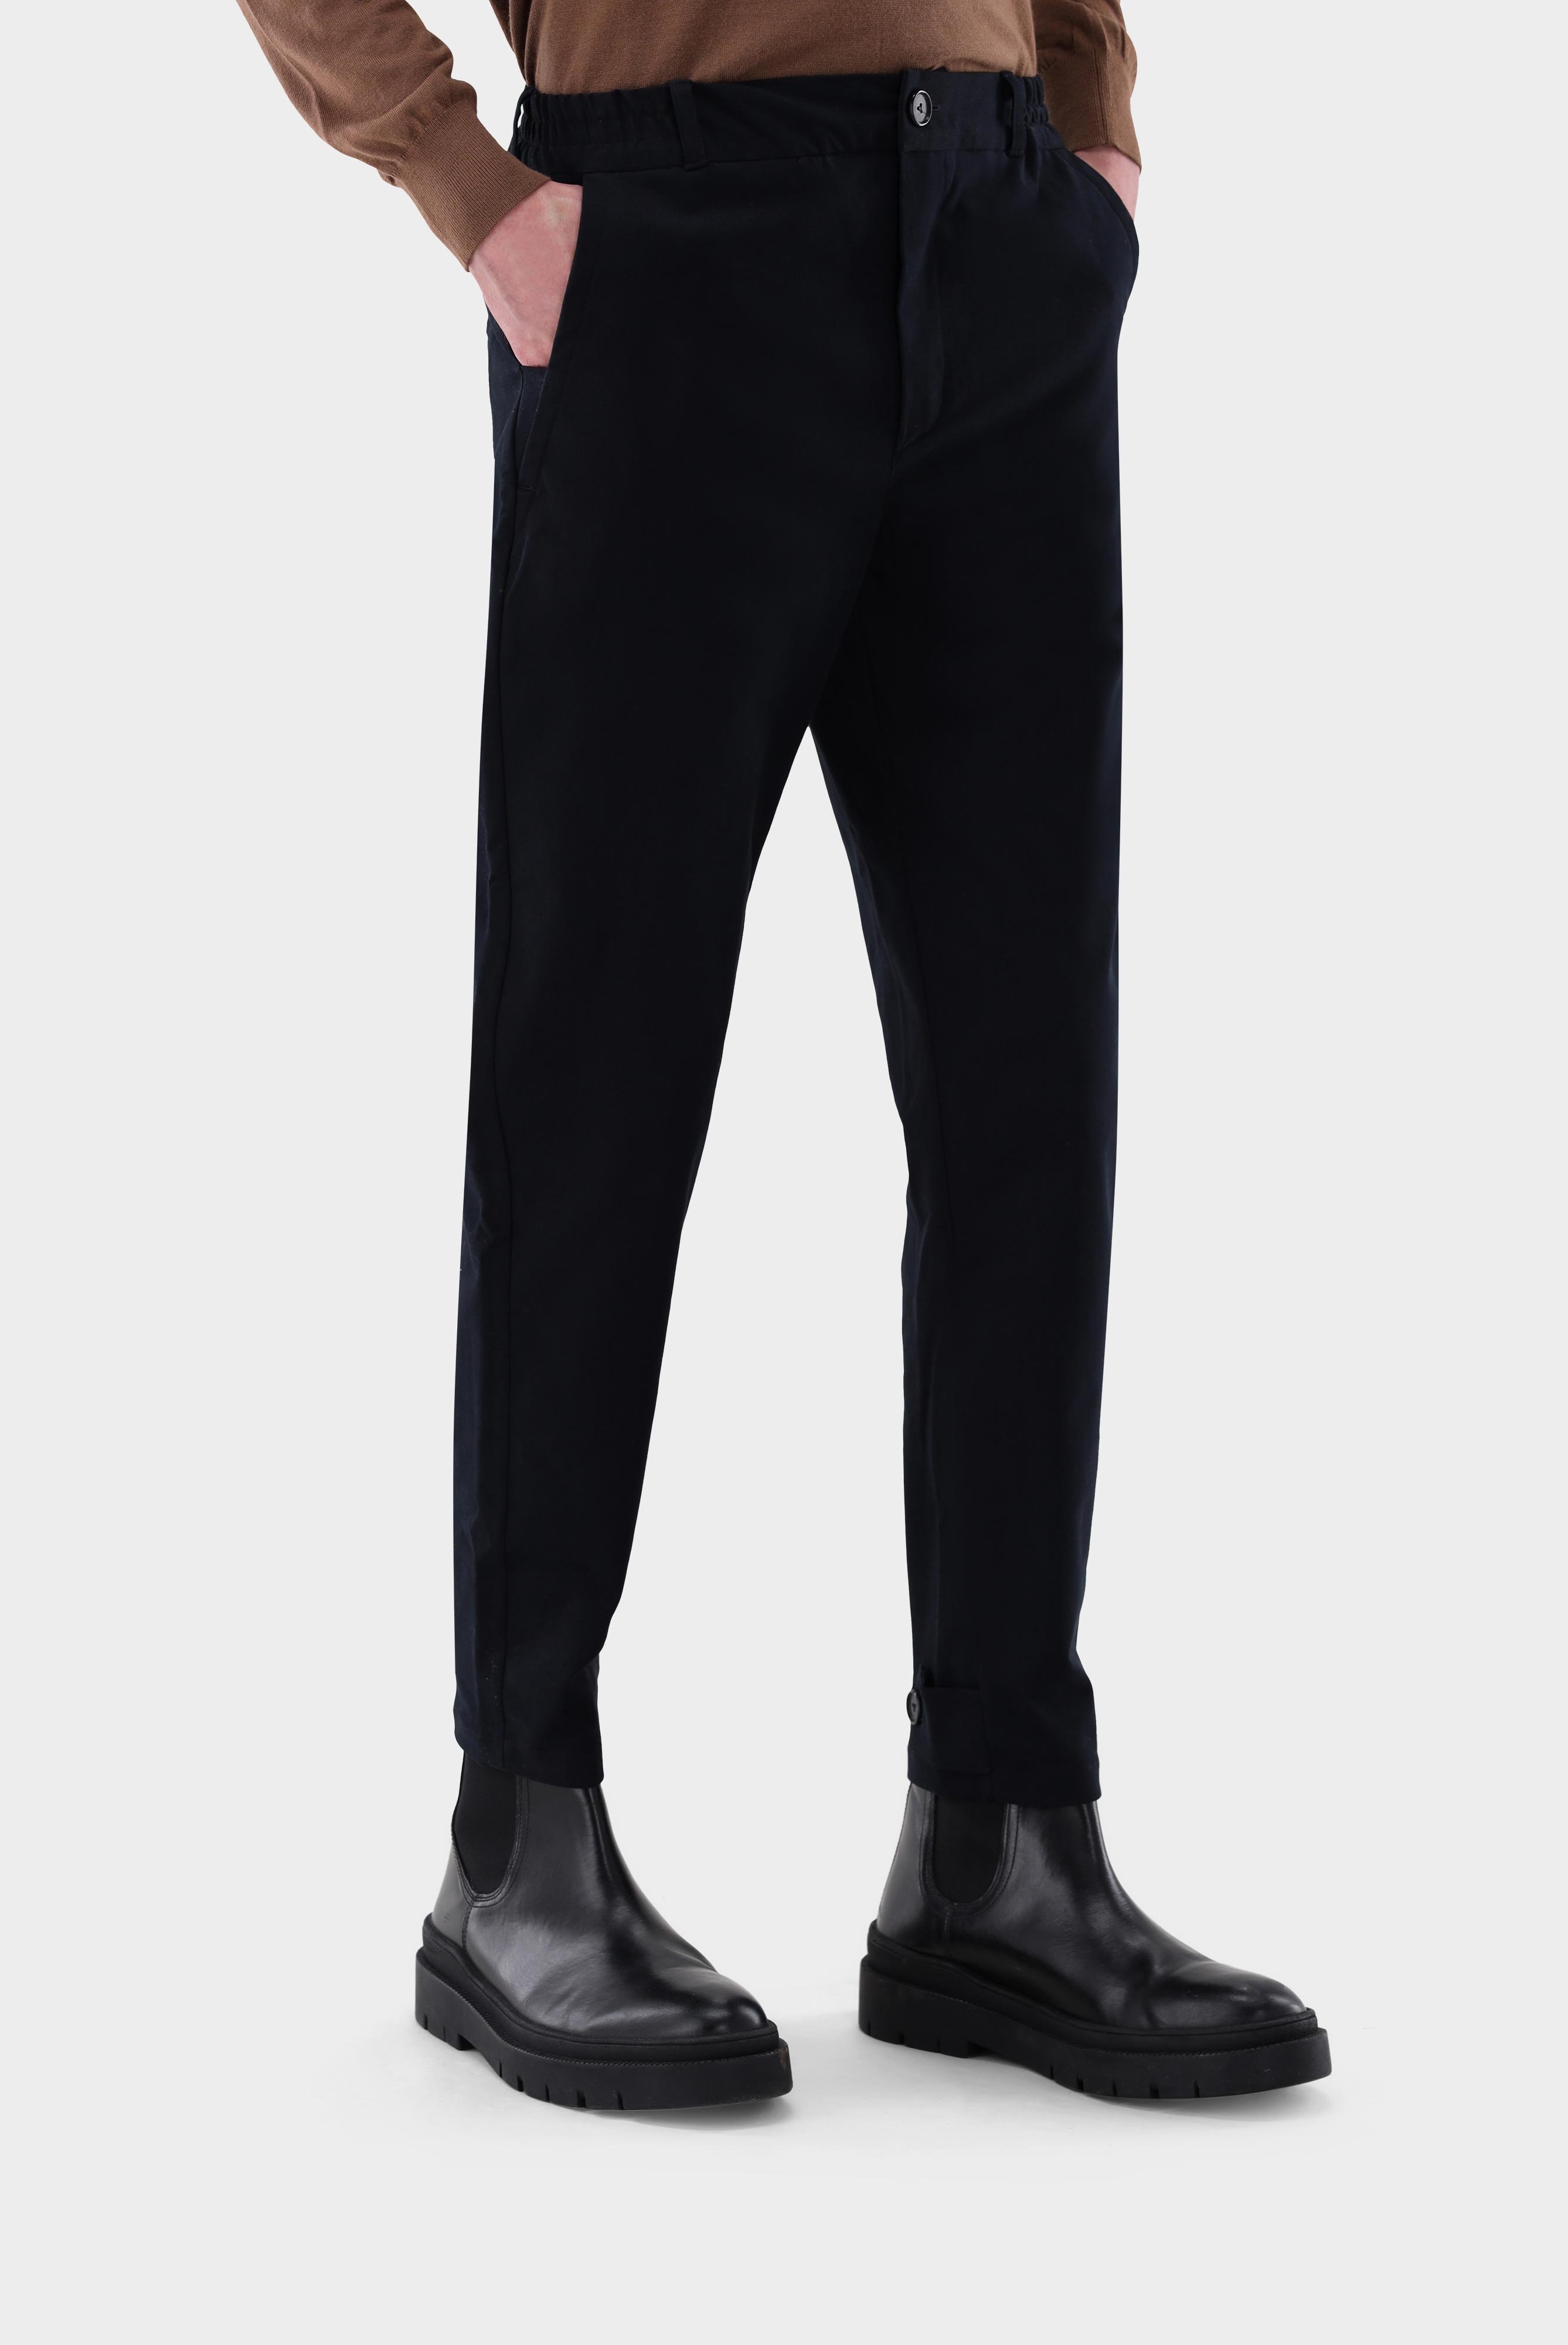 Jeans & Trousers+Casual Trousers made of Cotton Gabardine+20.1218.U6.H01590.790.48